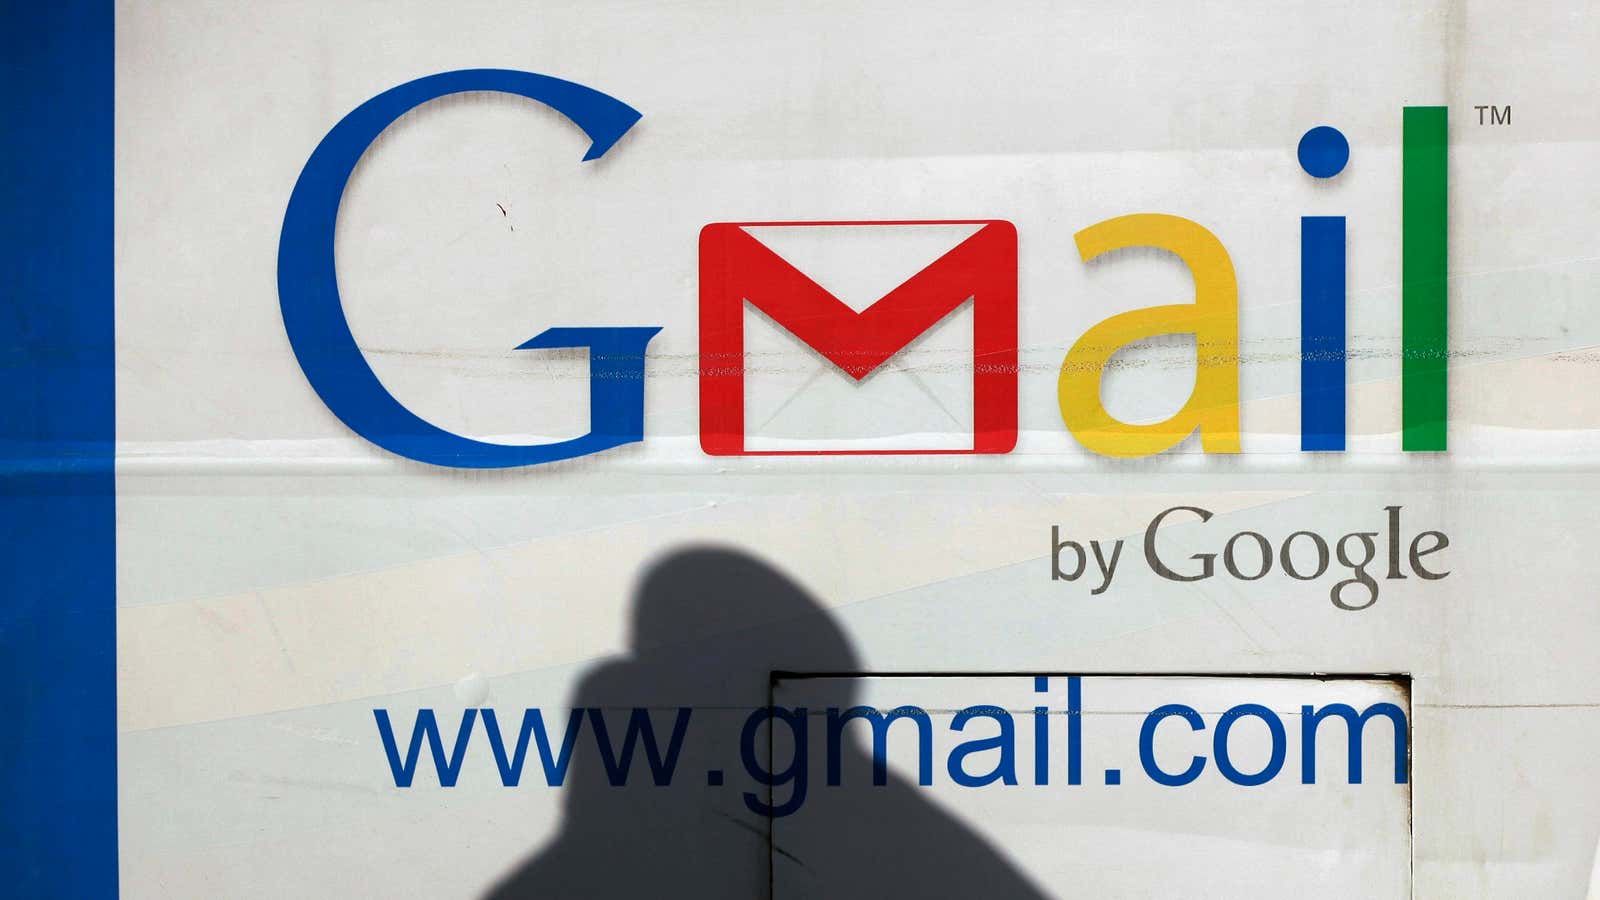 Google gives you ways to make email more secure, but not everyone uses them.